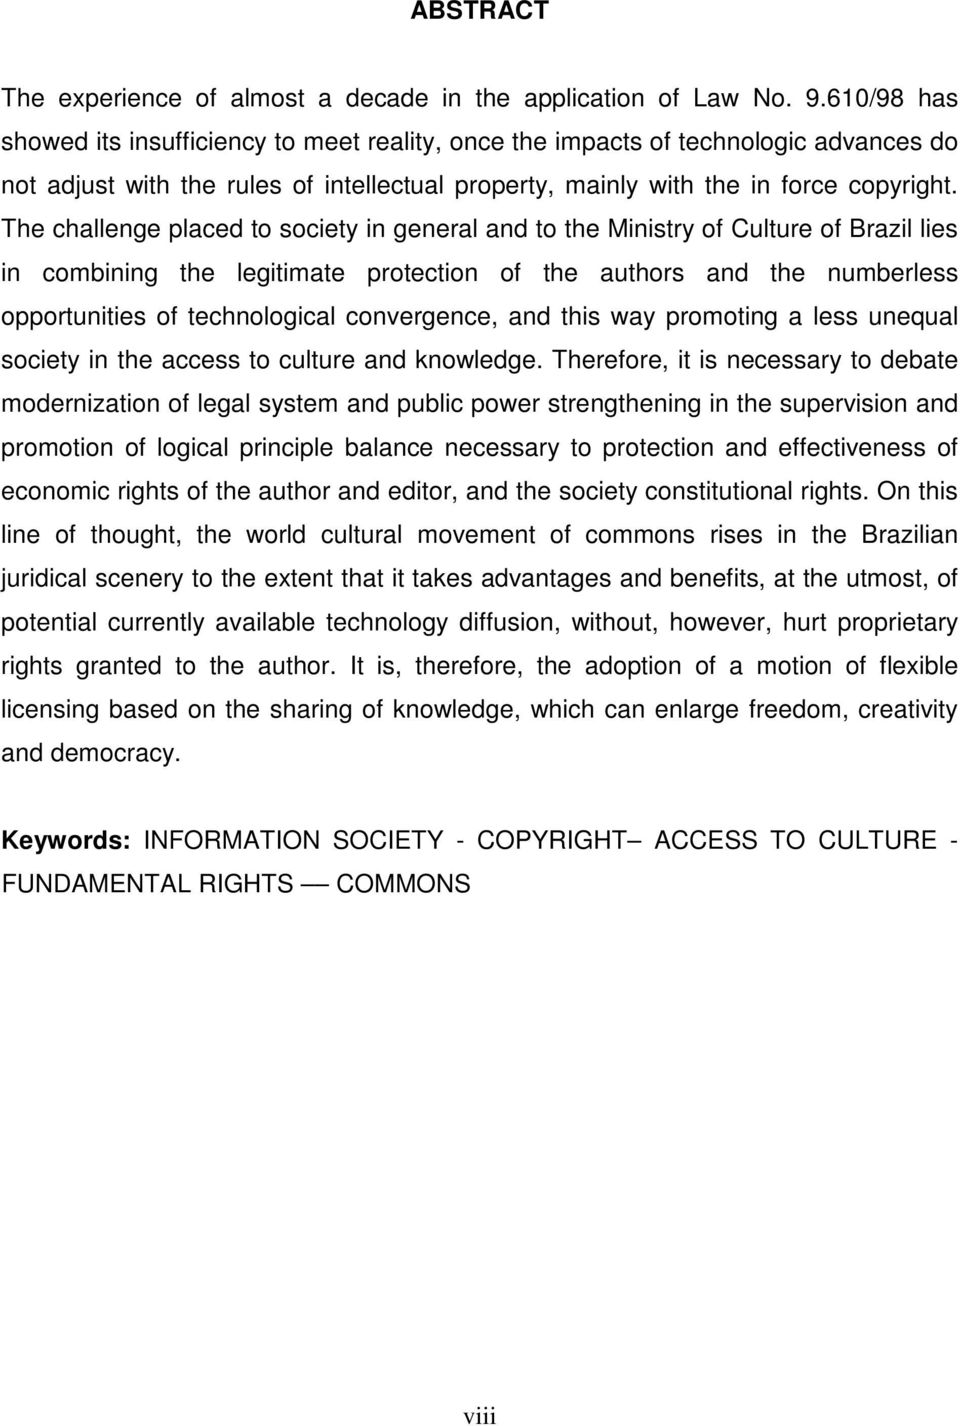 The challenge placed to society in general and to the Ministry of Culture of Brazil lies in combining the legitimate protection of the authors and the numberless opportunities of technological